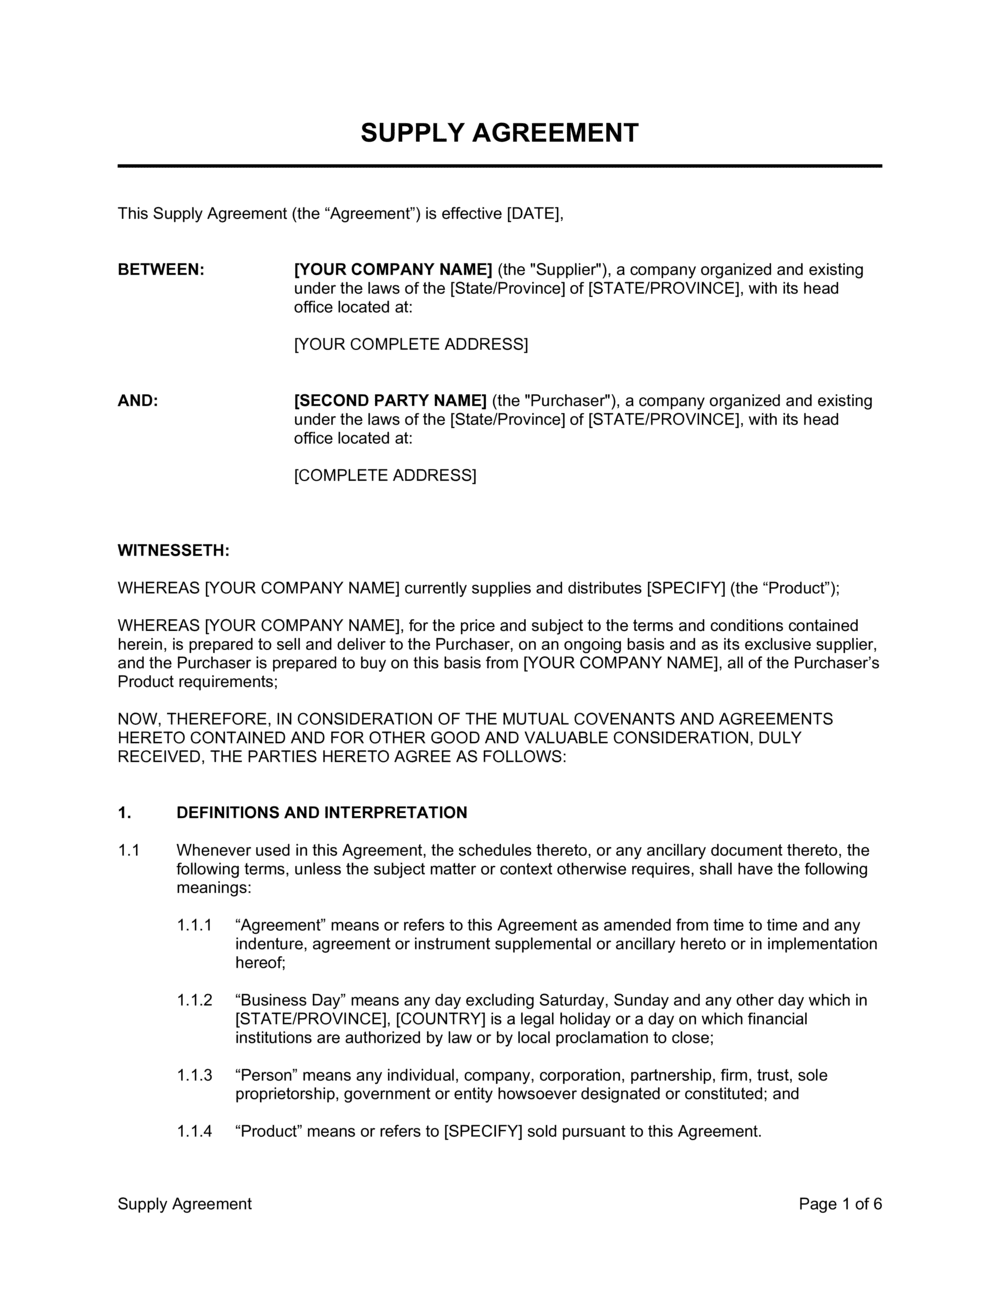 Supply Agreement Template  by Business-in-a-Box™ Pertaining To preferred supplier agreement template